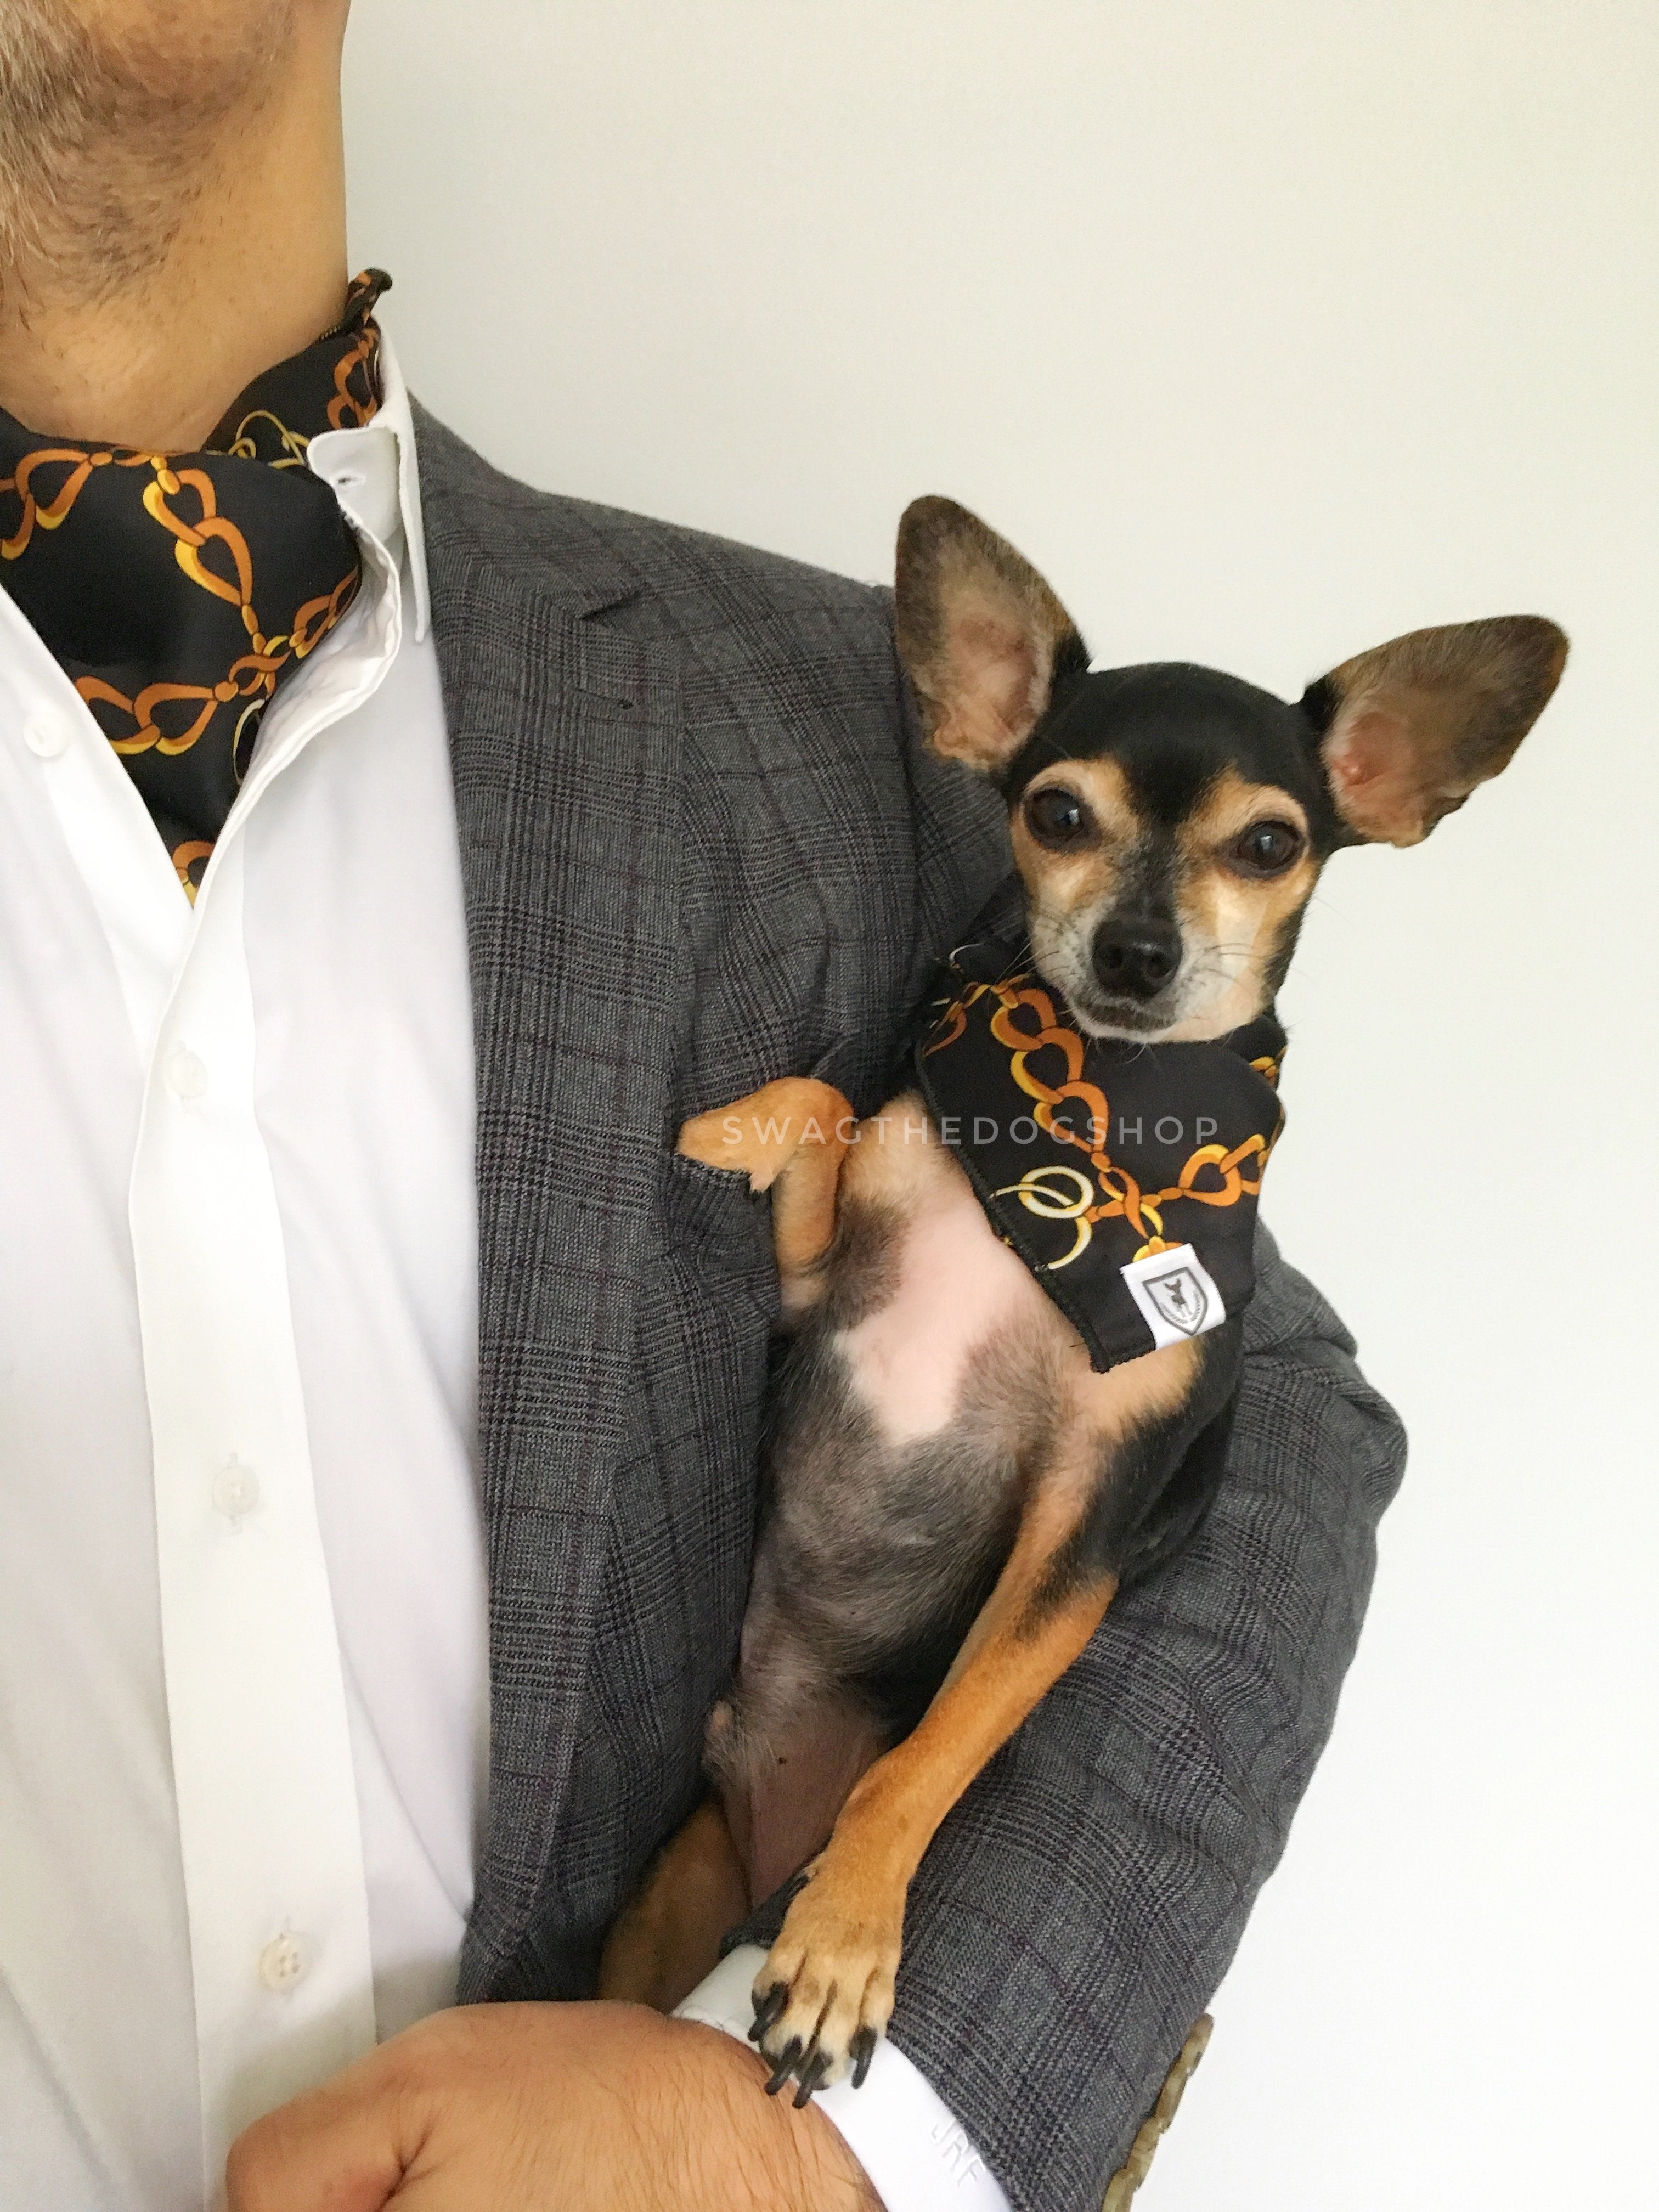 24K Black Gold Swagdana Scarf - Man using Swagdana Scarf as Cravat and Hugo, The Chihuahua Wearing Swagdana Scarf as Bandana. Dog Bandana. Dog Scarf